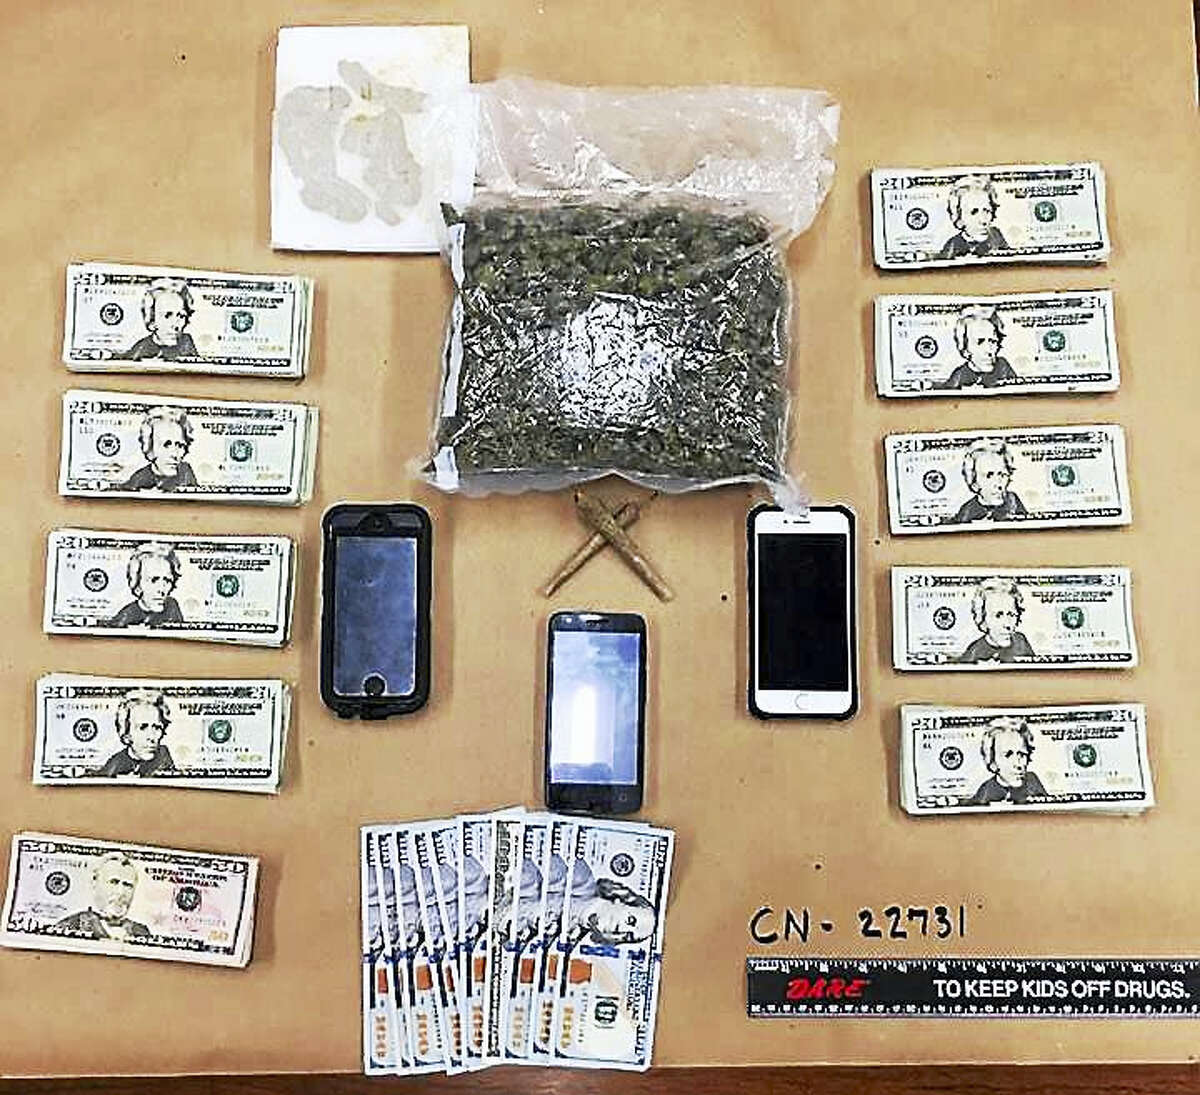 Two men are facing charges after North Haven police say they were found with 11 ounces of marijuana, hash oil and thousands of dollars in cash during a traffic stop.